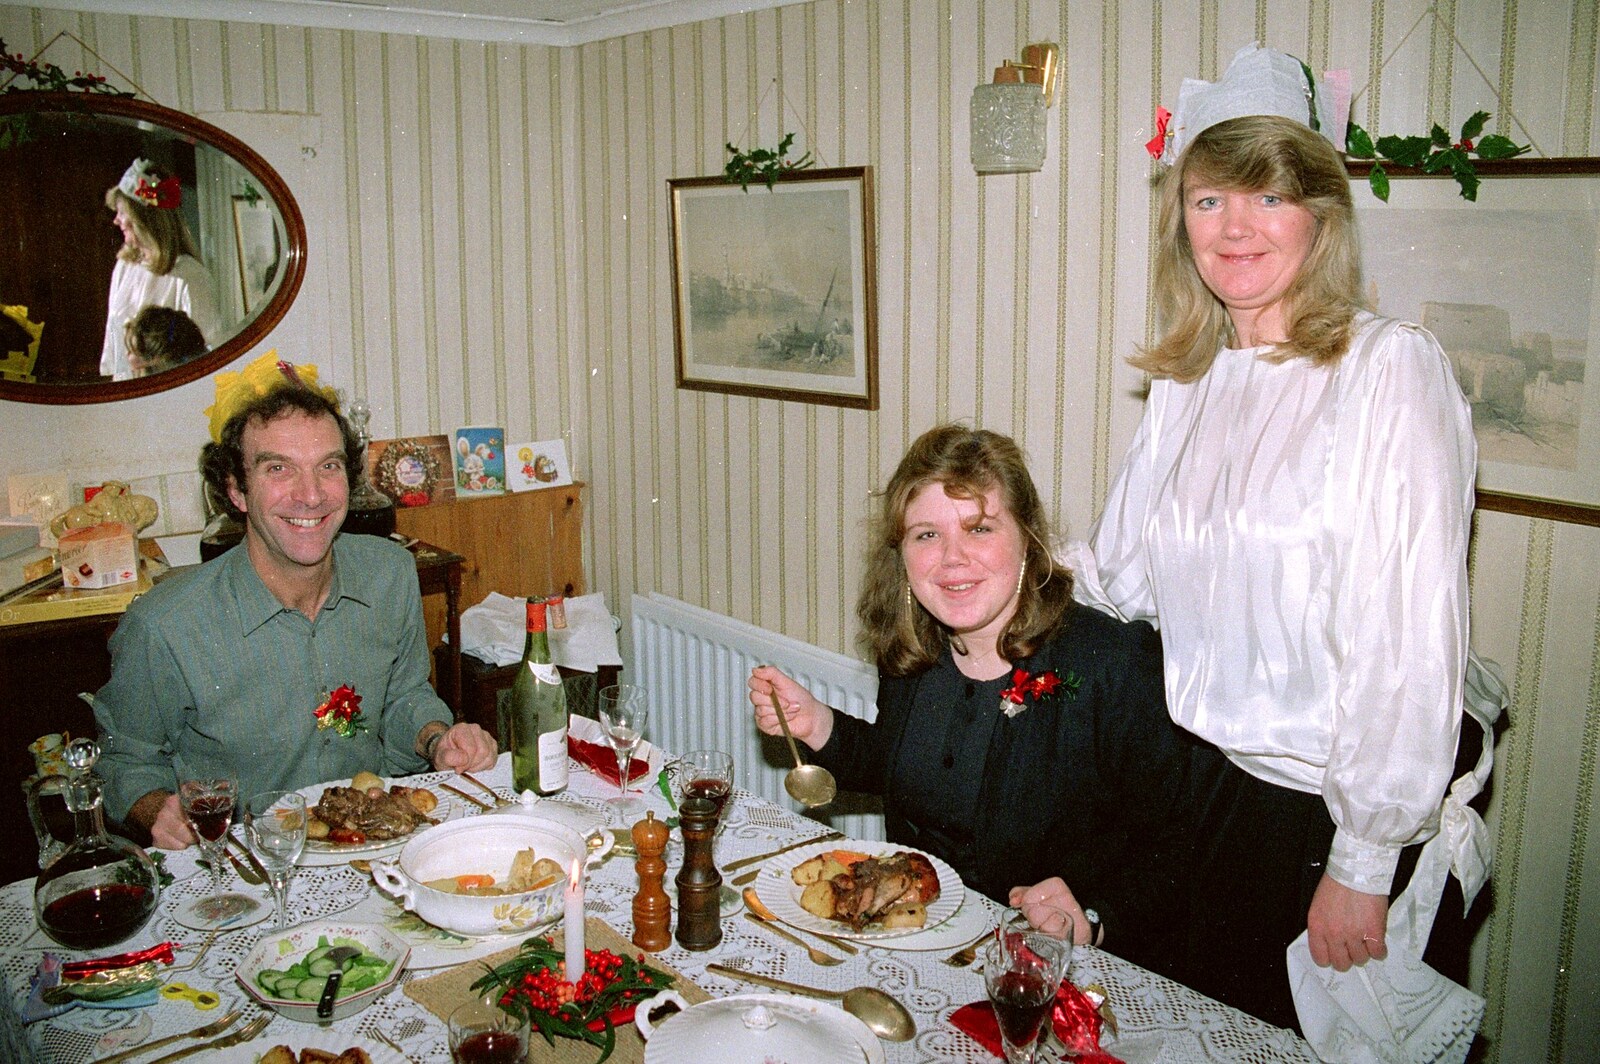 Mike, Sis and Mother at Bracken Way from Hamish's 21st and Christmas, New Milton and Bransgore - 25th December 1987